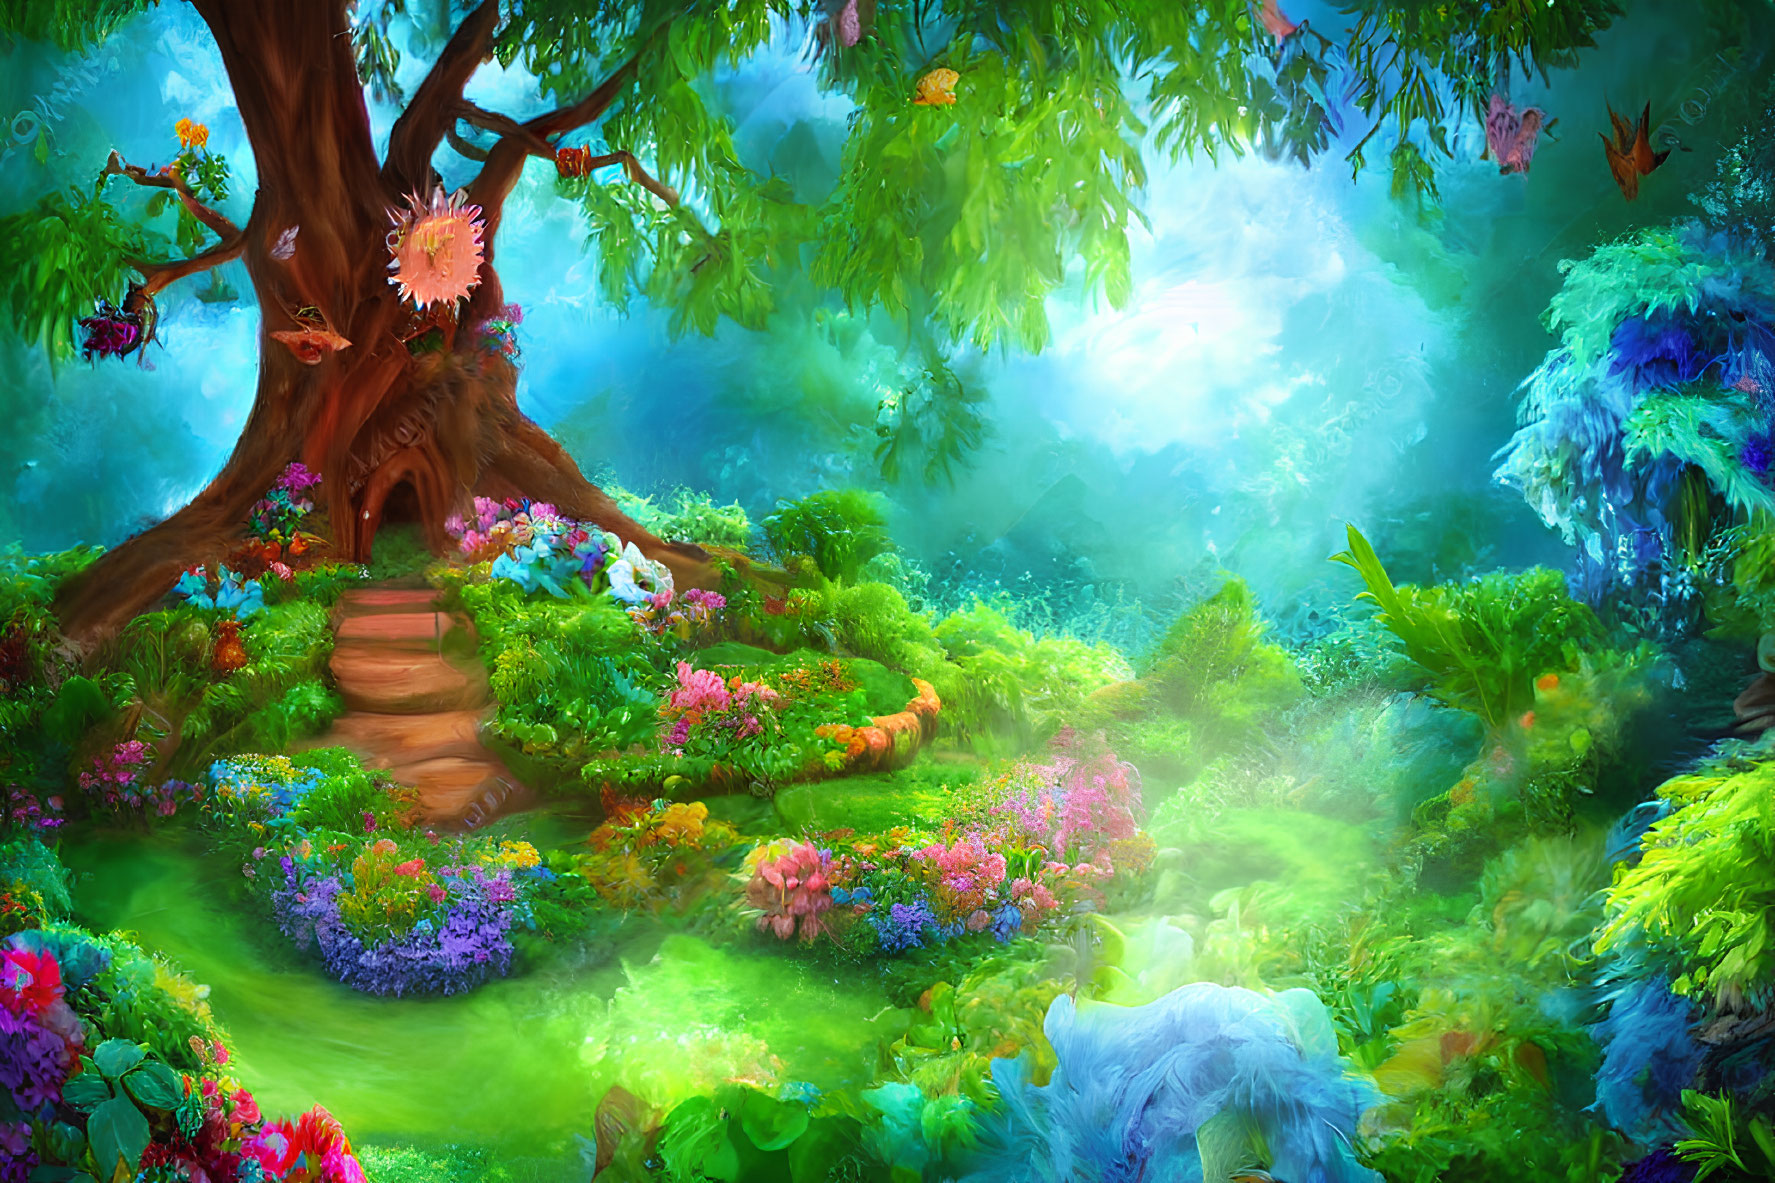 Vibrant enchanted forest with mystical tree doorway, colorful flowers, and glowing atmosphere